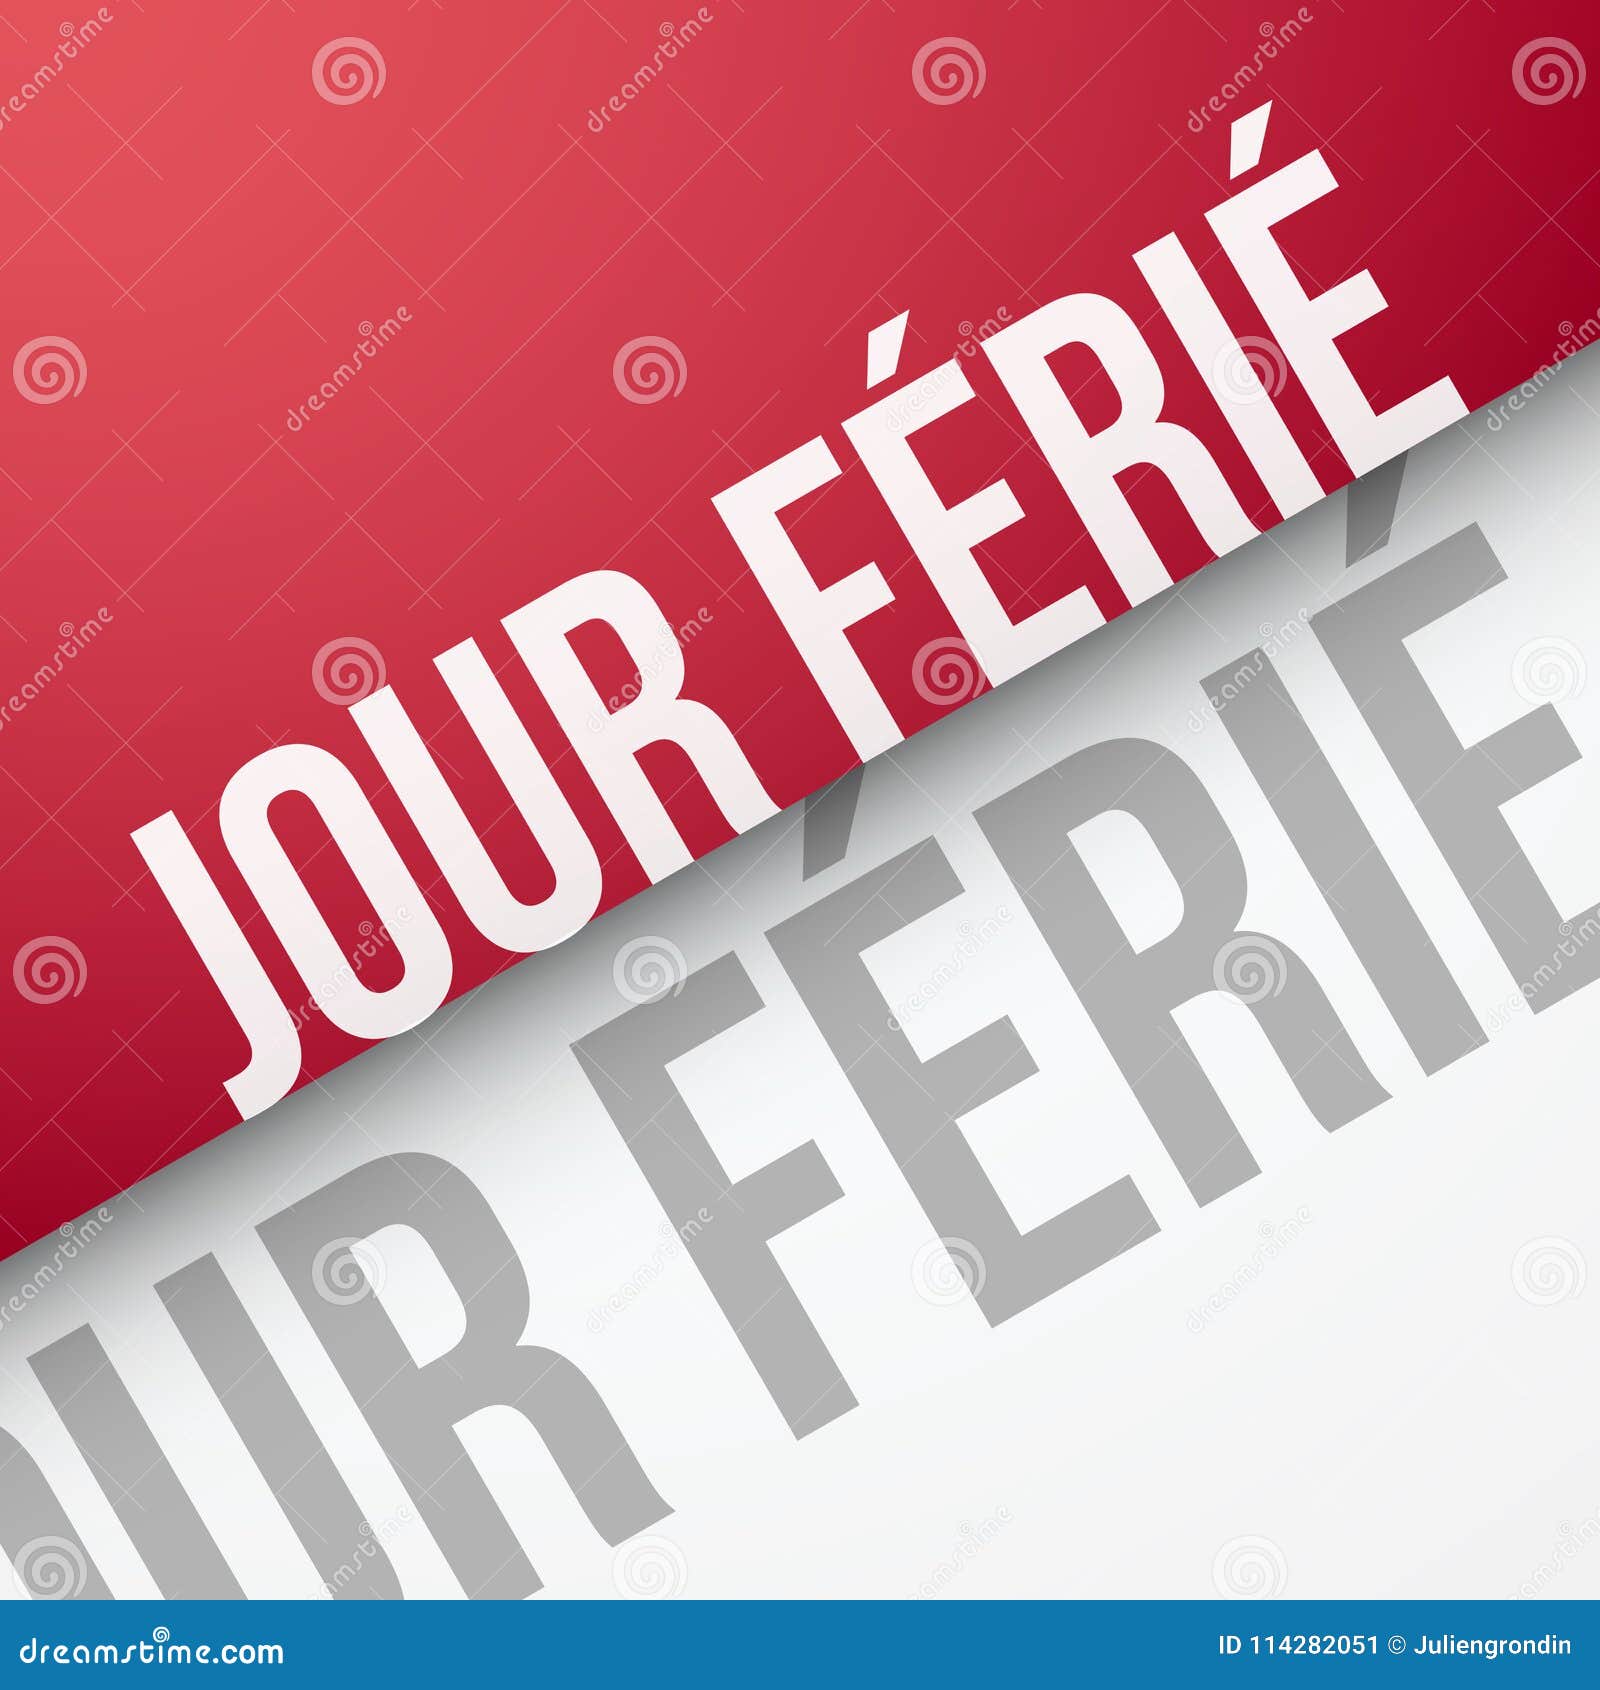 public holiday in french : jour fÃÂ©riÃÂ©